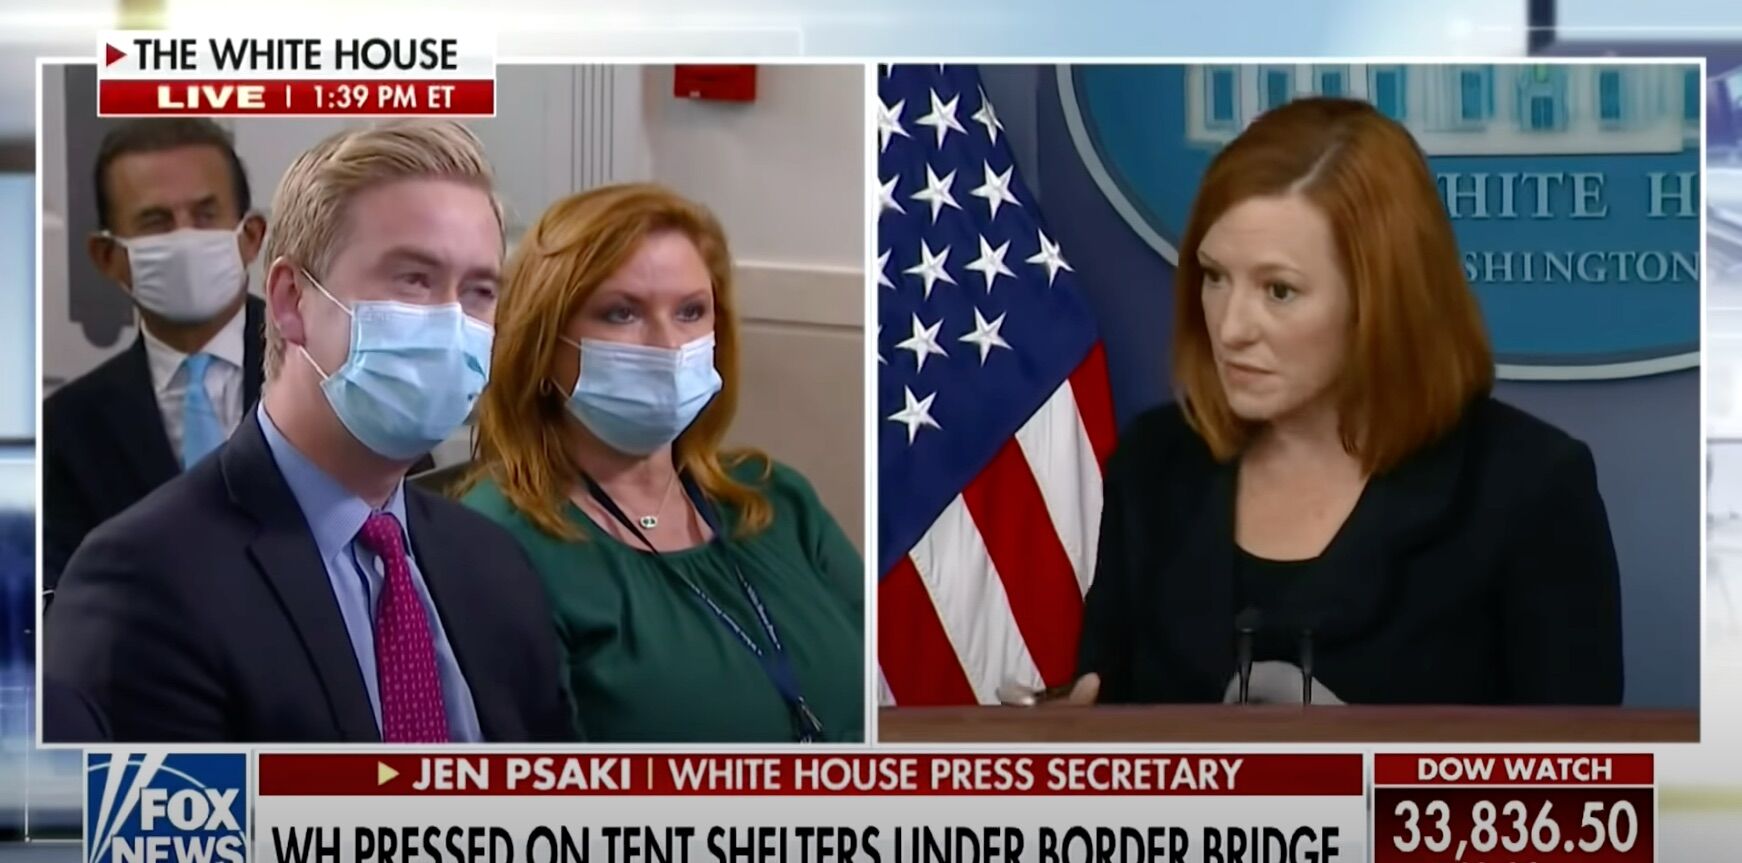 It didn't take long for Jen Psaki to spell it out for Peter Doocy.